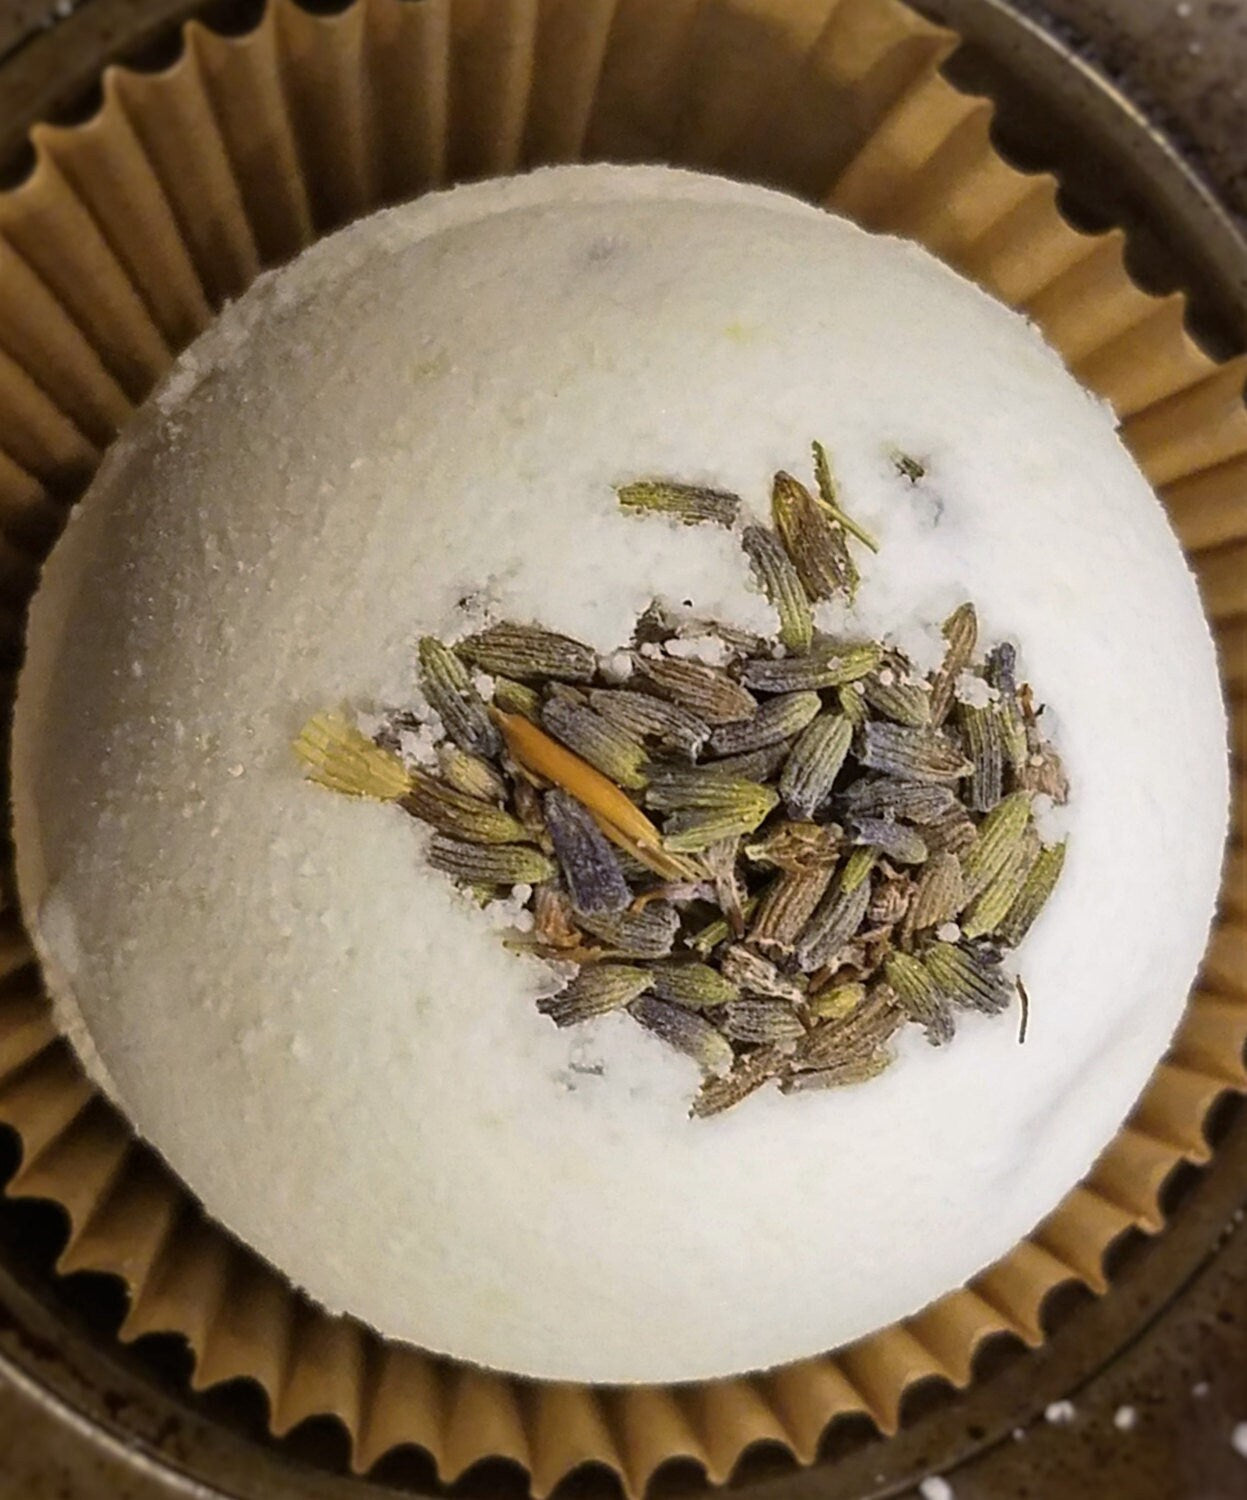 Ivy Creek Lavender Bath Bomb - Natural Bath Fizzies for a Blissful Bathing Experience - Perfect Gifts for Her and Mom